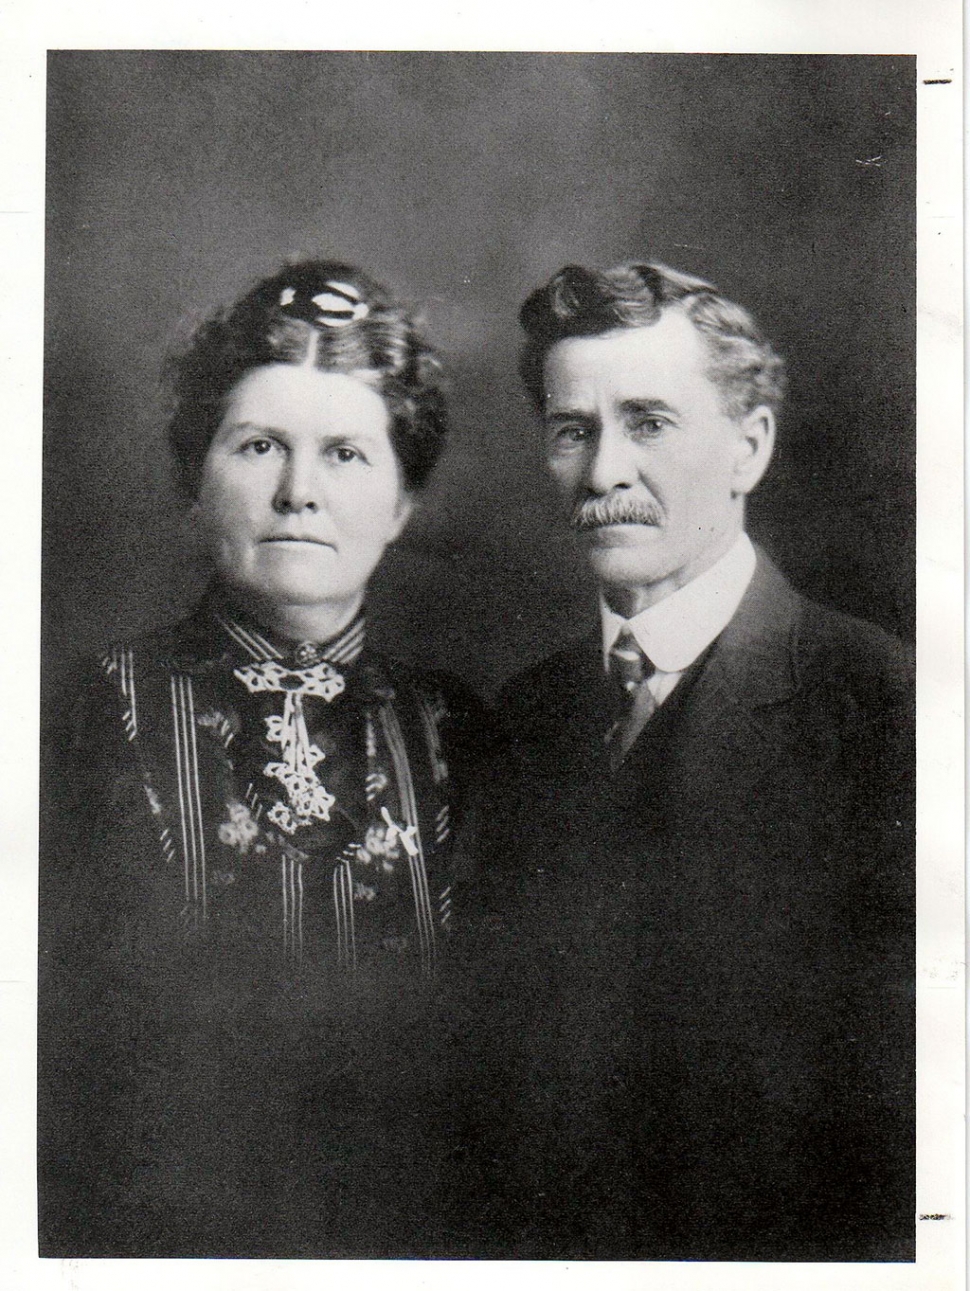 (l-r) Hattie Virginia and her husband George N. King. Photos courtesy Fillmore Historical Museum.